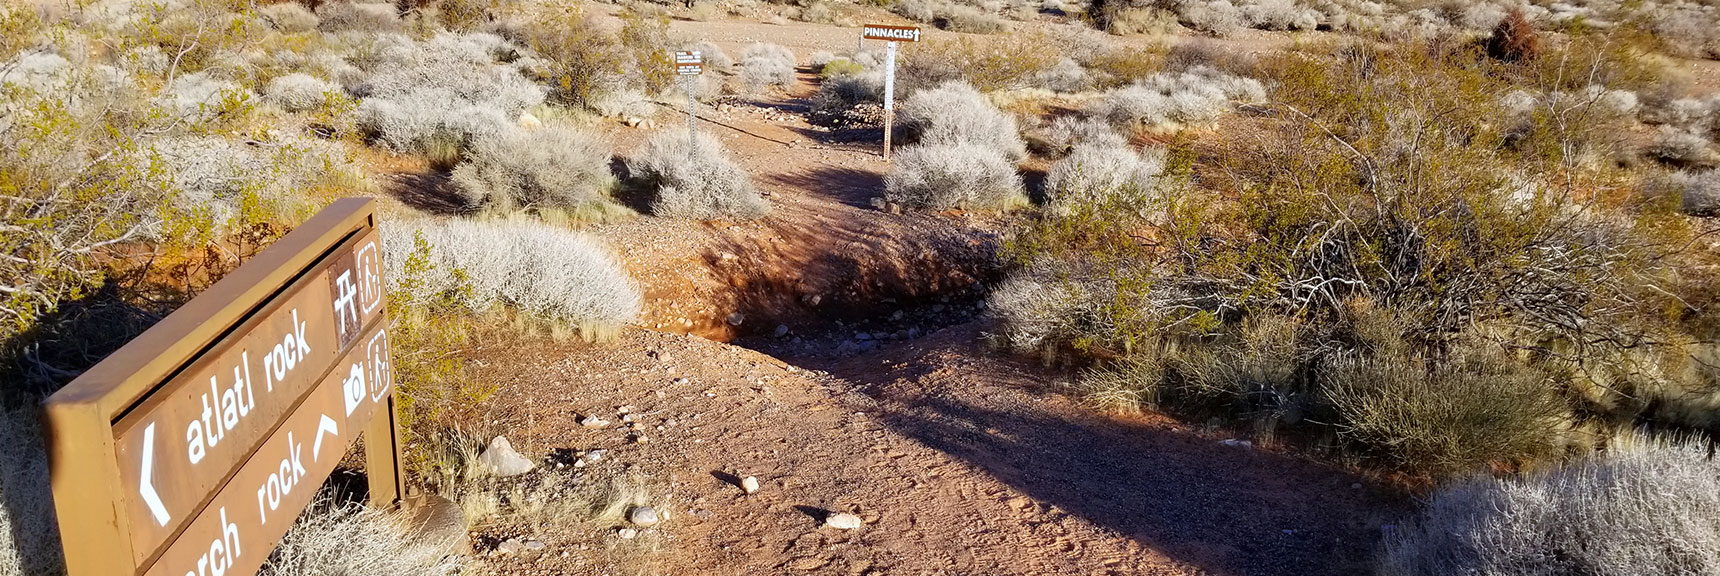 Trailhead for Pinnacles Loop Trail in Valley of Fire State Park, Nevada